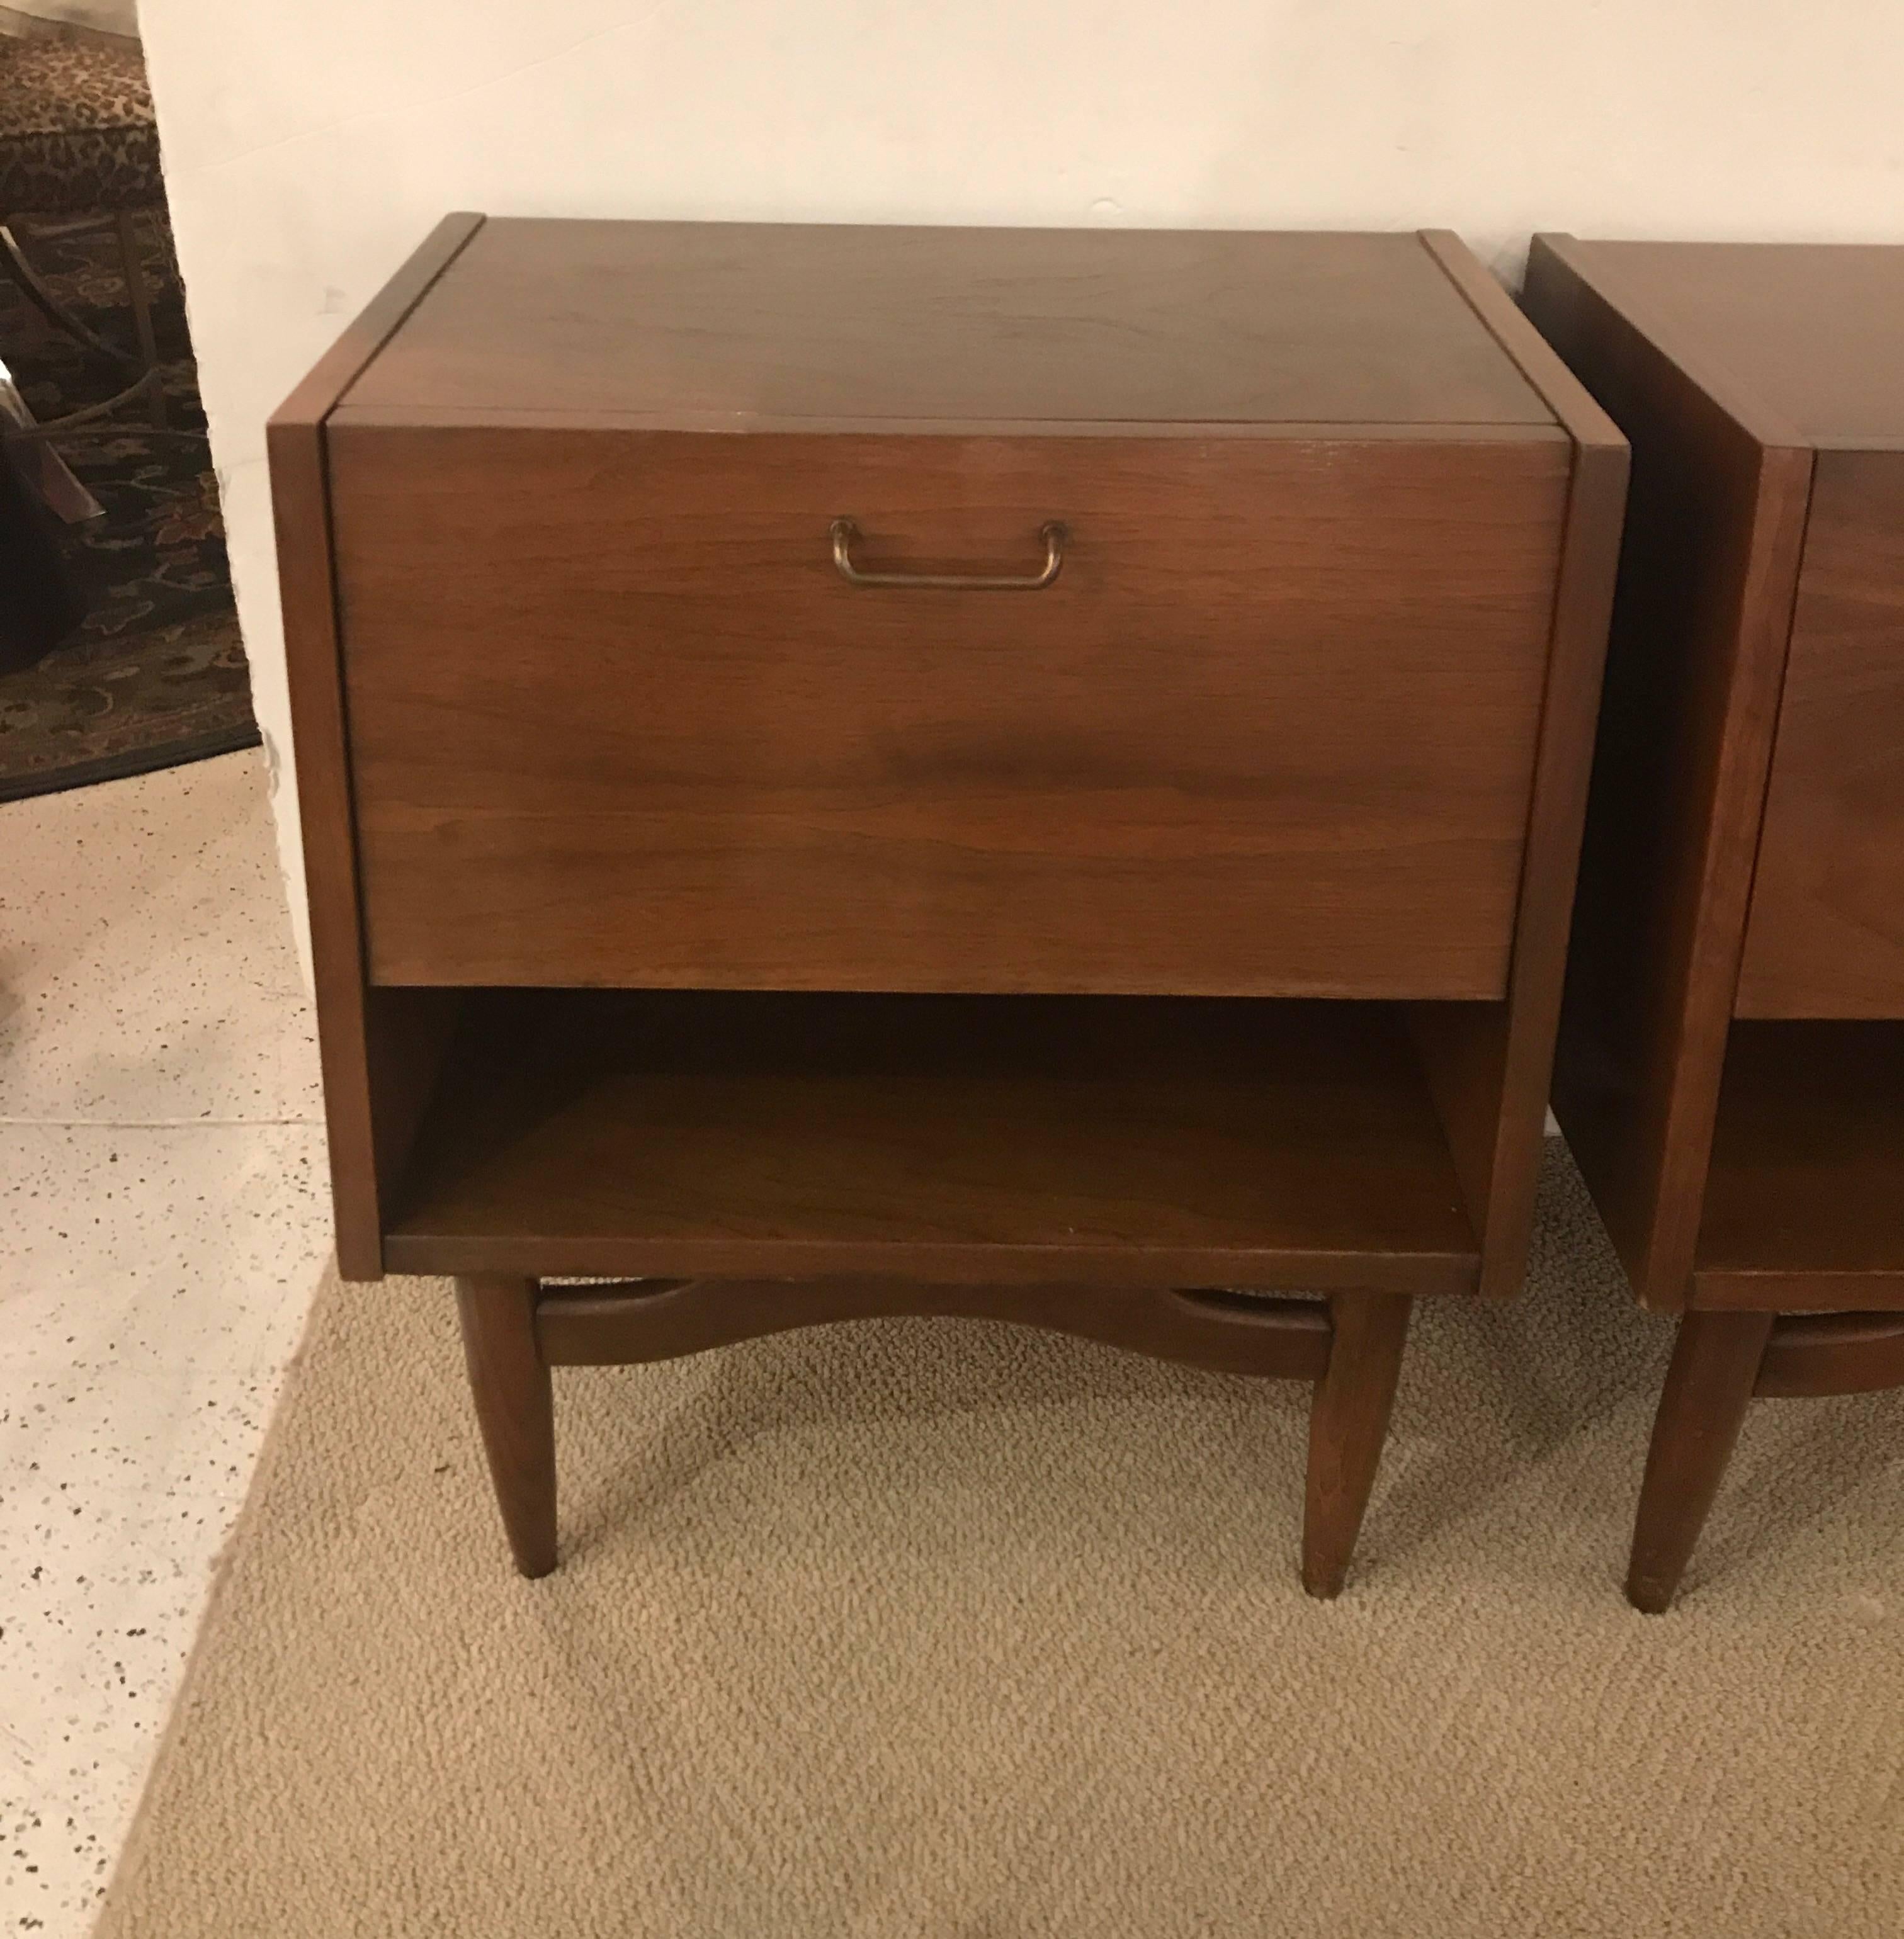 Pair of Merton Gershun nightstands for American of Martinsville.
This vintage pair of wooden nightstands, designed by Merton Gershun for the American of Martinsville 'Dania Collection', produced circa 1950s-1960s, comes with laminated sides and